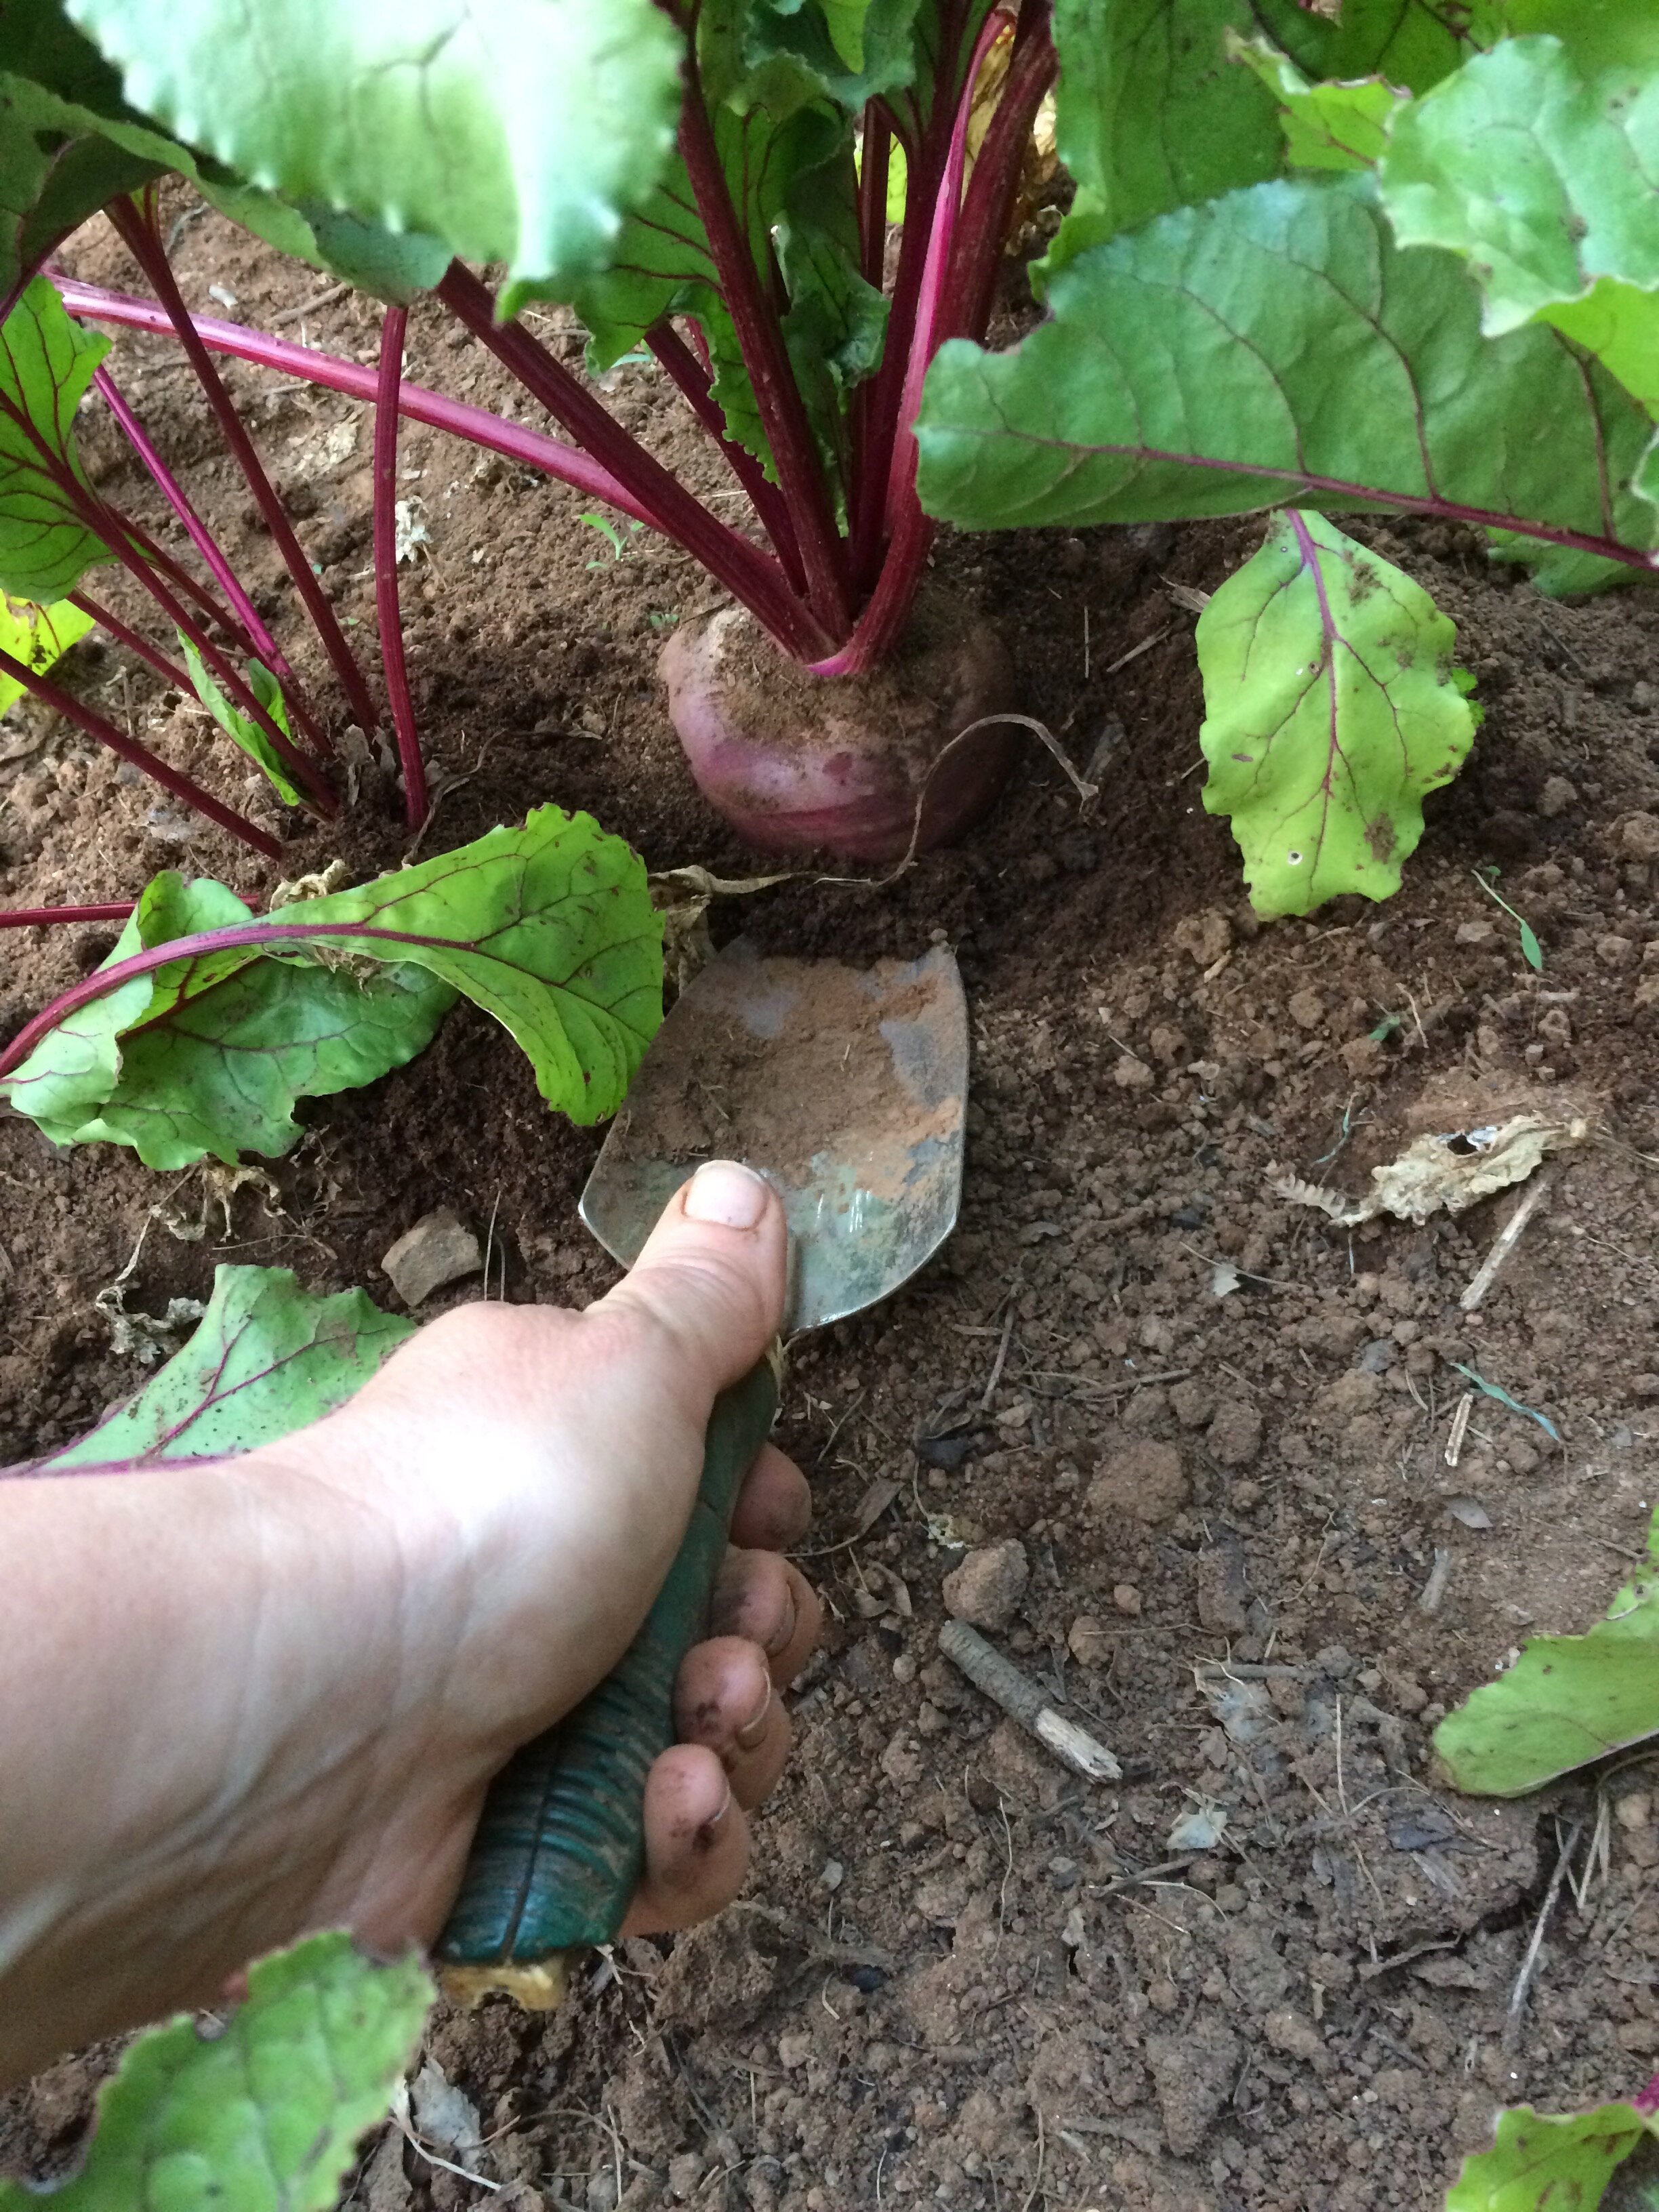 Hand holding trowel in dirt at base of beetroot